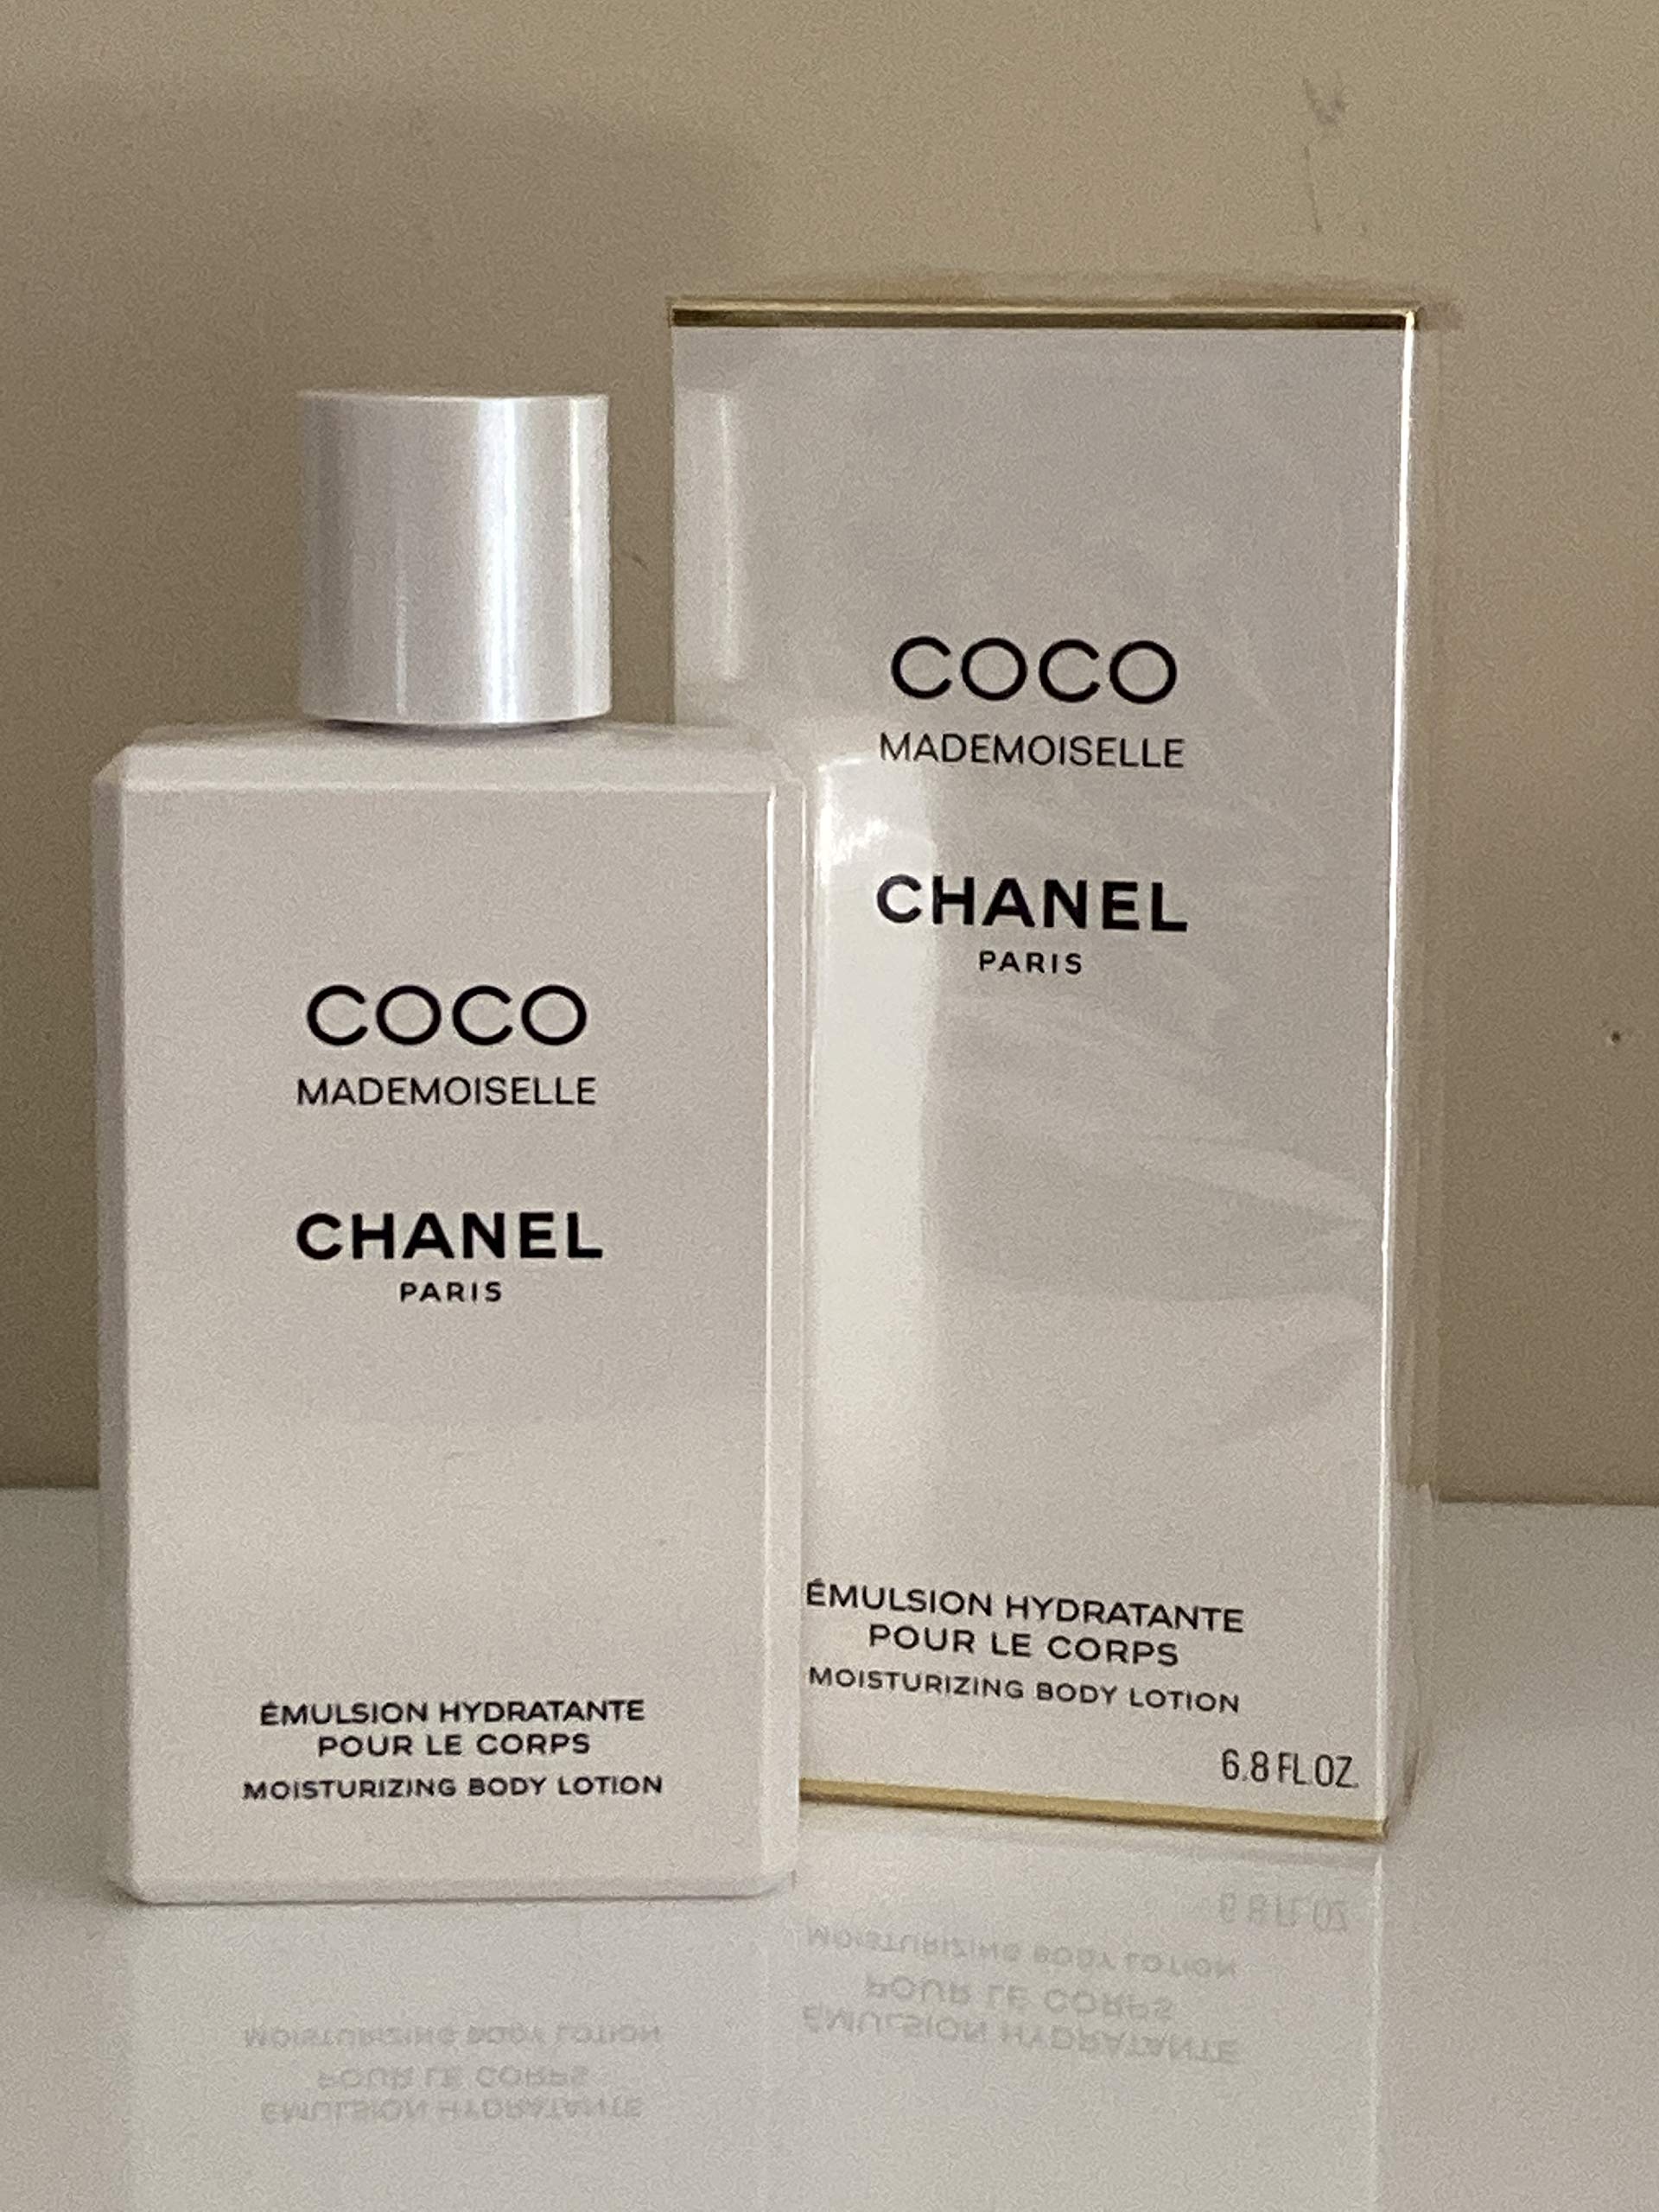 Buy Chanel Coco Mademoiselle Intense Eau De Parfum Spray 50ml/1.7oz Online  at Low Prices in India 